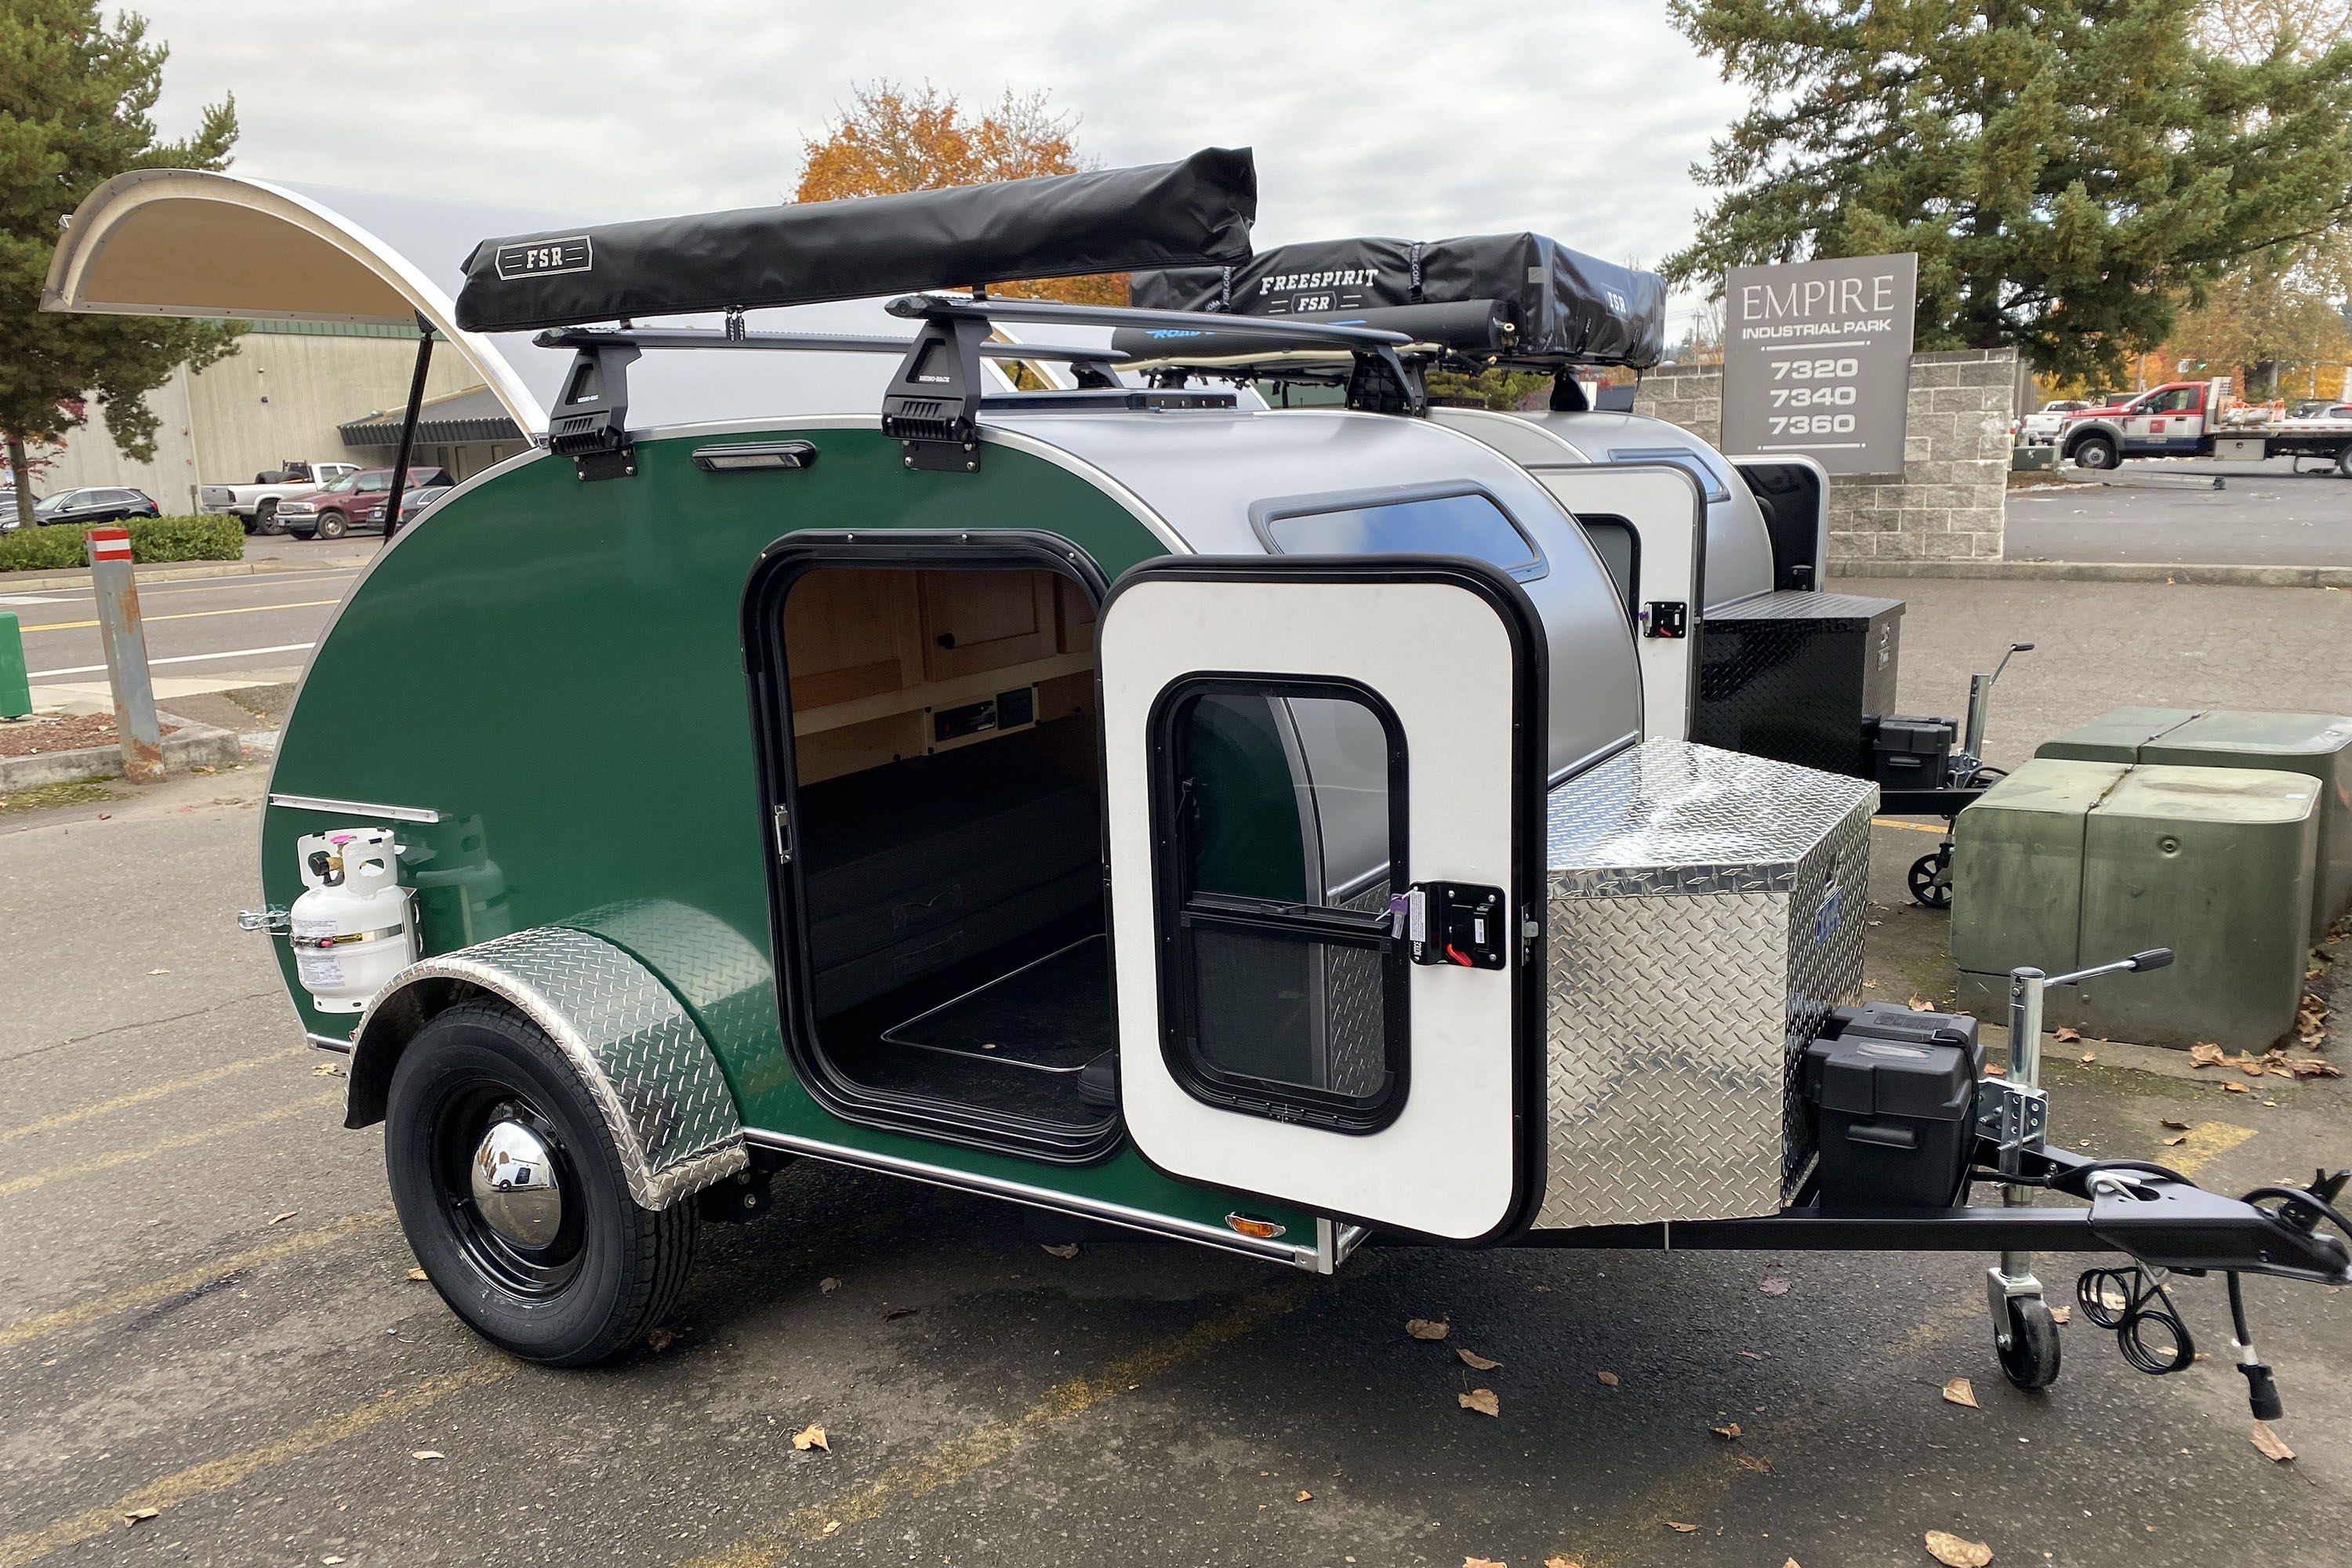 <p>Portland, Oregon-based <a href="https://aeroteardrops.com/">Aero</a> offers a number of customizable tiny RV models, but the 5-by-10-foot Steel is its most compact they currently offer. Like many teardrop-style trailers, the Steel features a sleeping cabin and galley that can be configured several ways. It also comes with a Bluetooth stereo system, hardwood cabinetry, LED lighting, and underfloor storage.  </p>